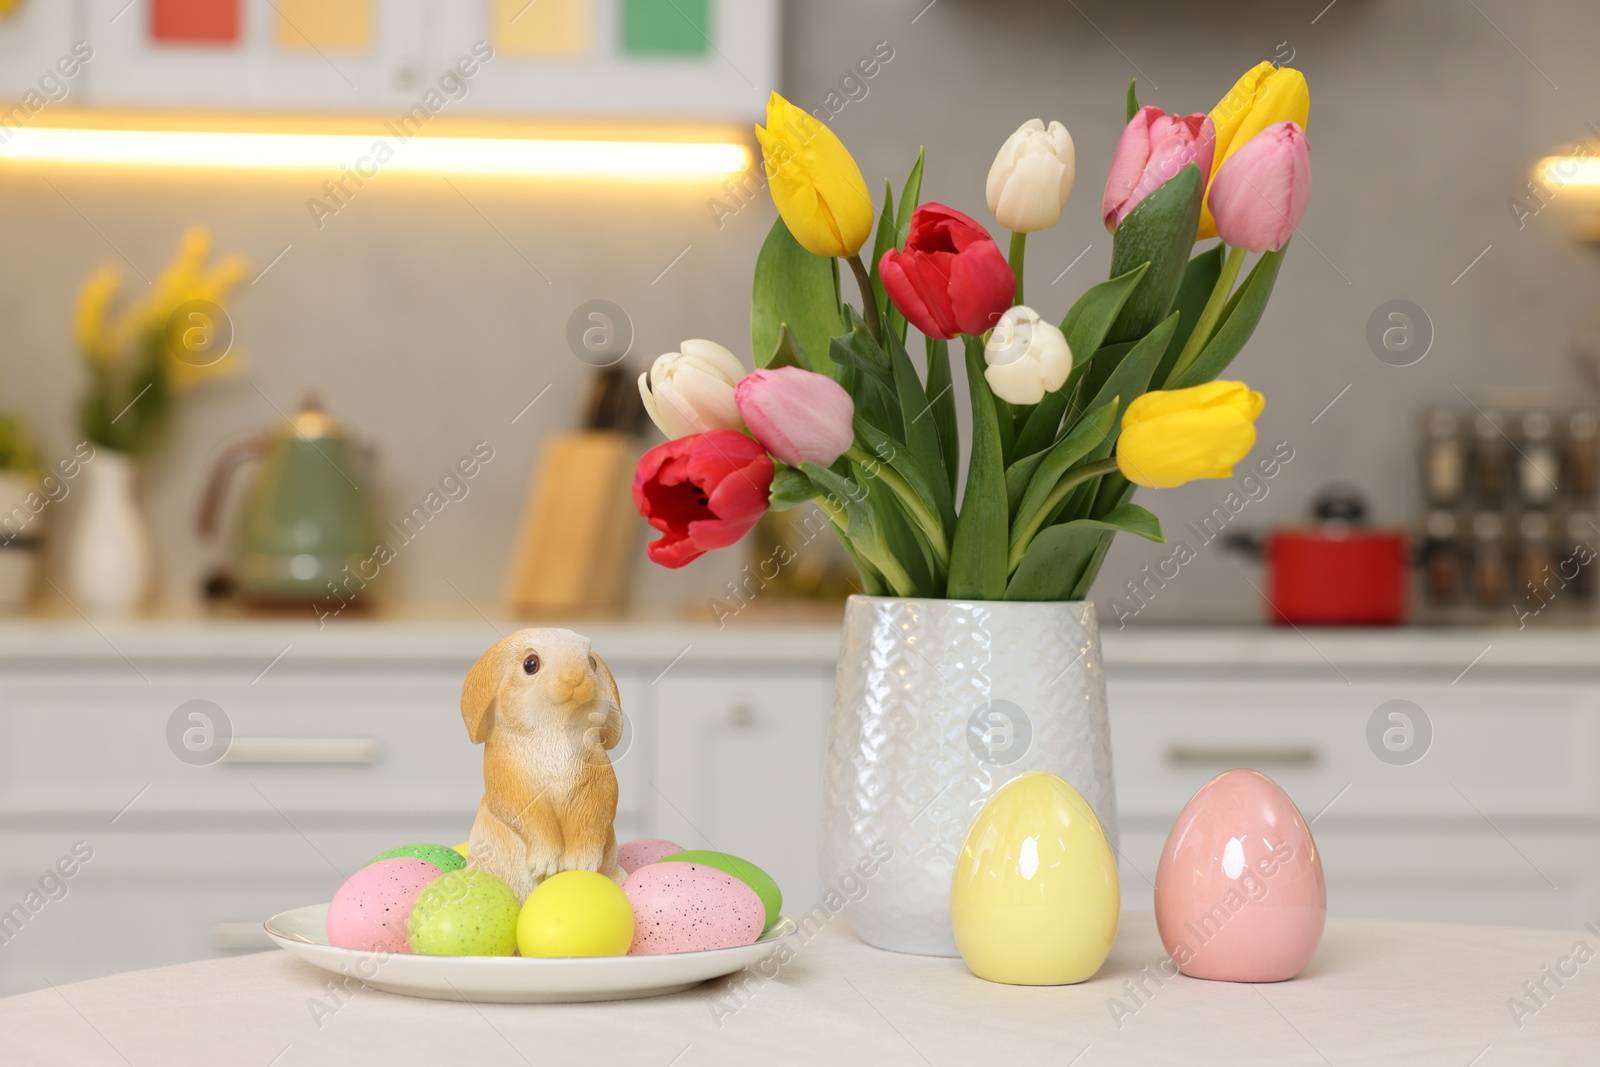 Photo of Bouquet of tulips, painted eggs and Easter decorations on white table in kitchen